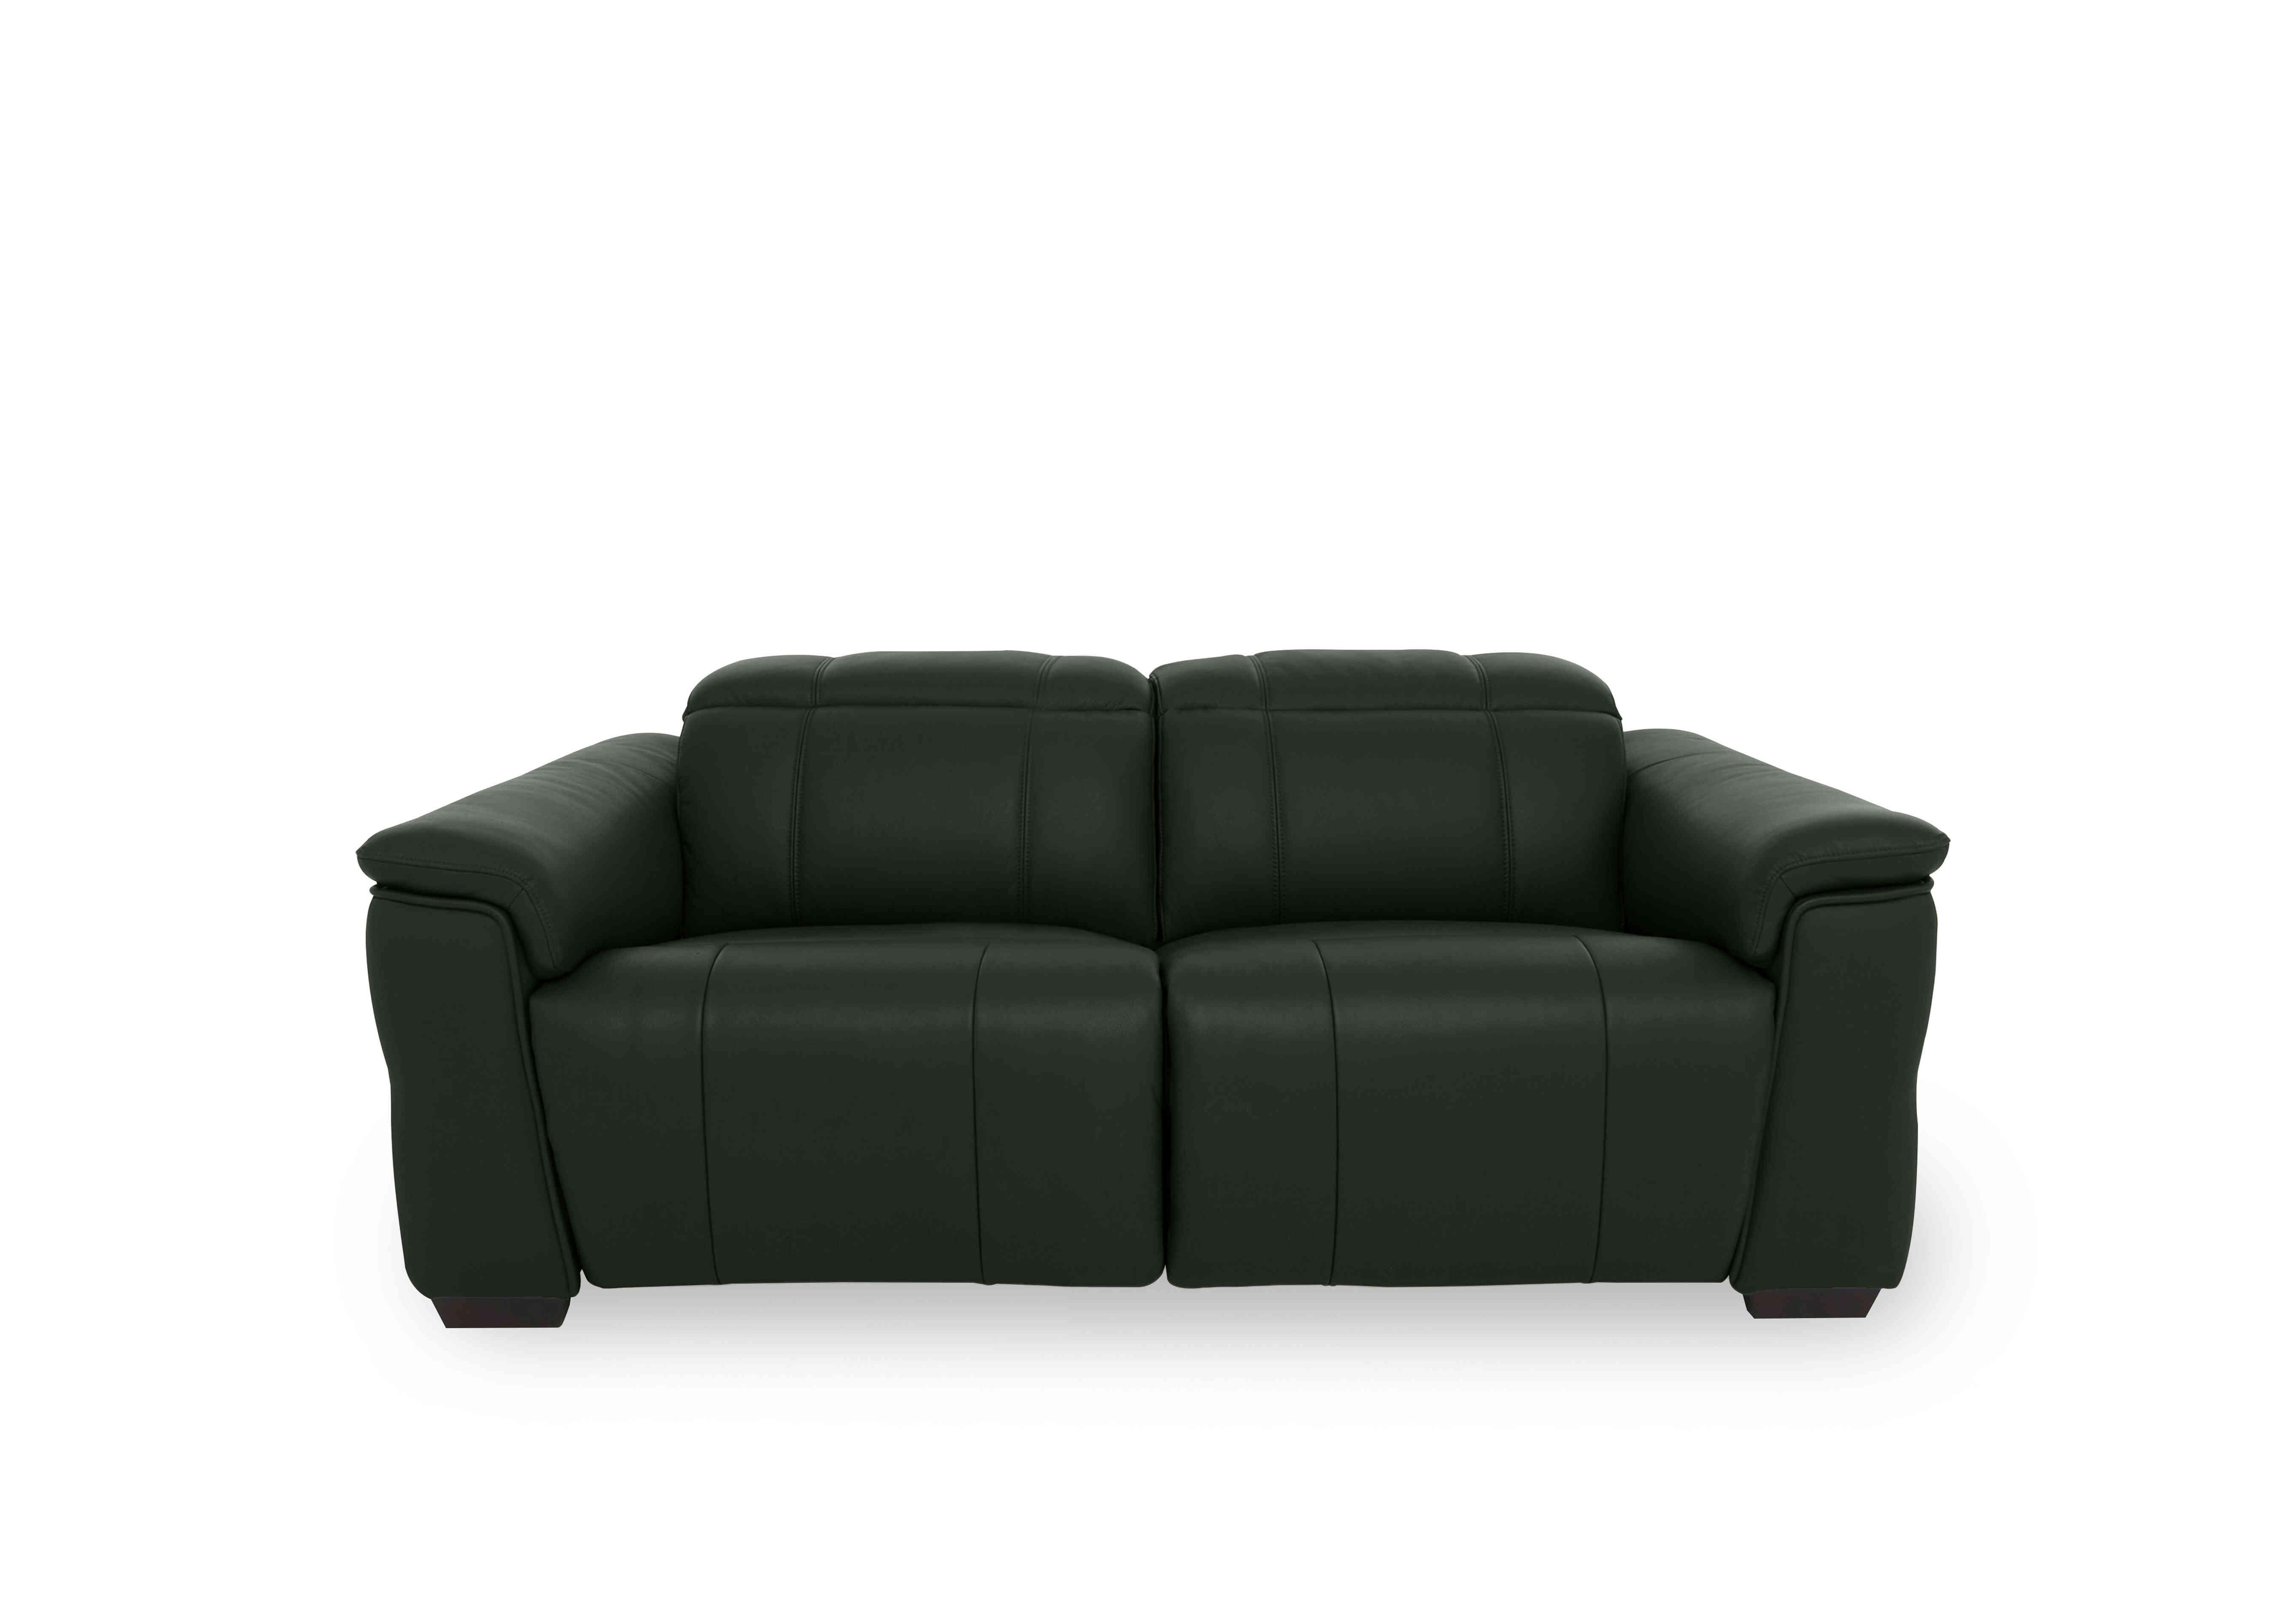 Inca Leather 2 Seater Power Recliner Sofa with Power Headrests in Cat-40/10 Oslo Pine on Furniture Village